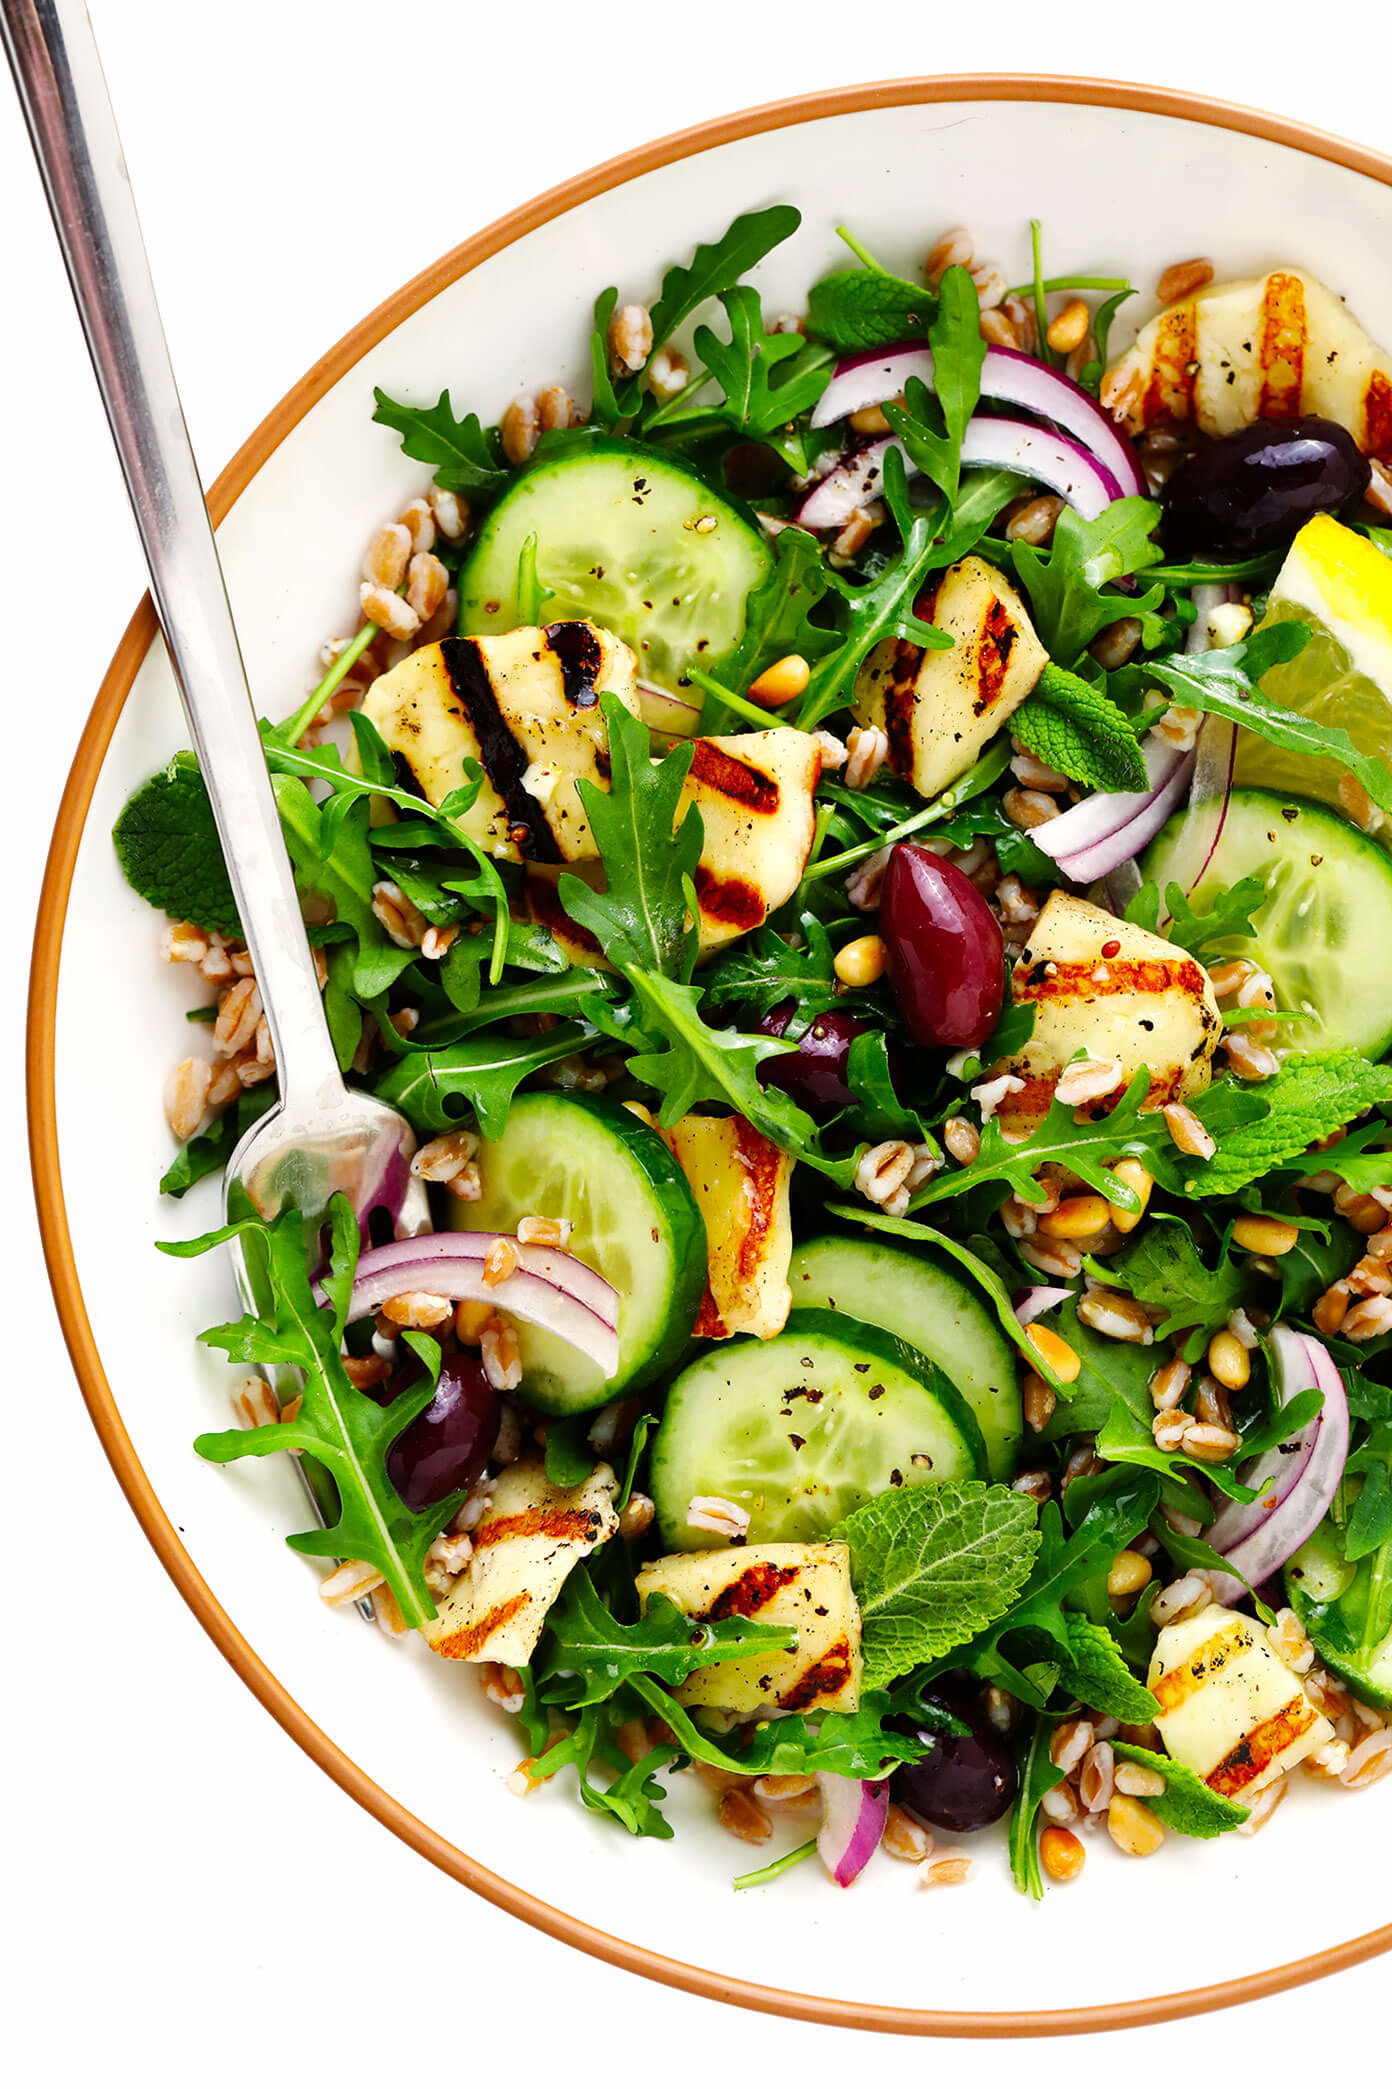 White bowl filled with halloumi salad containing sliced cucumber, sliced onions, grilled halloumi, and arugula.